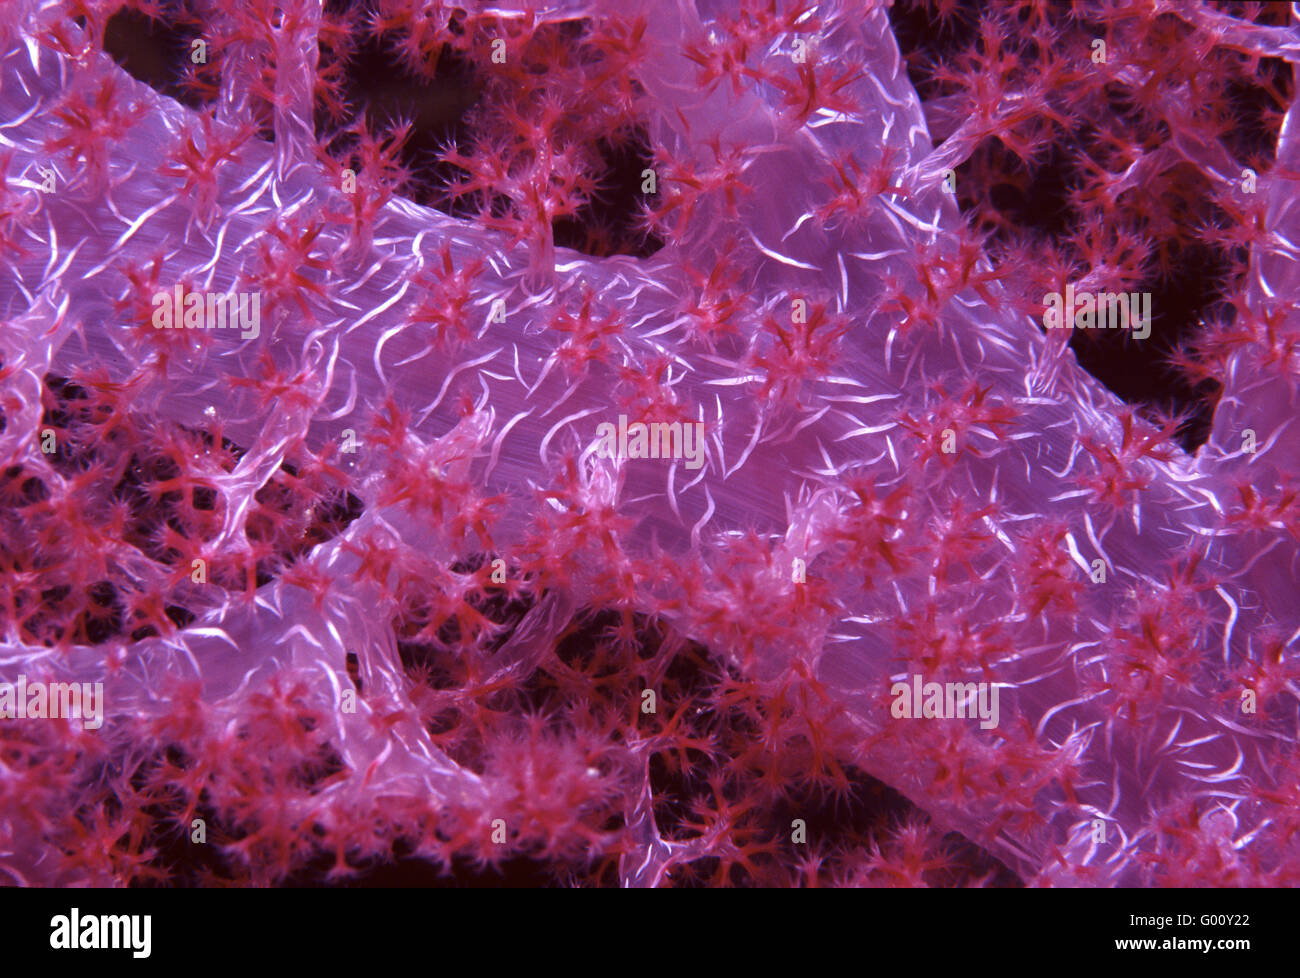 Soft Coral Stock Photo